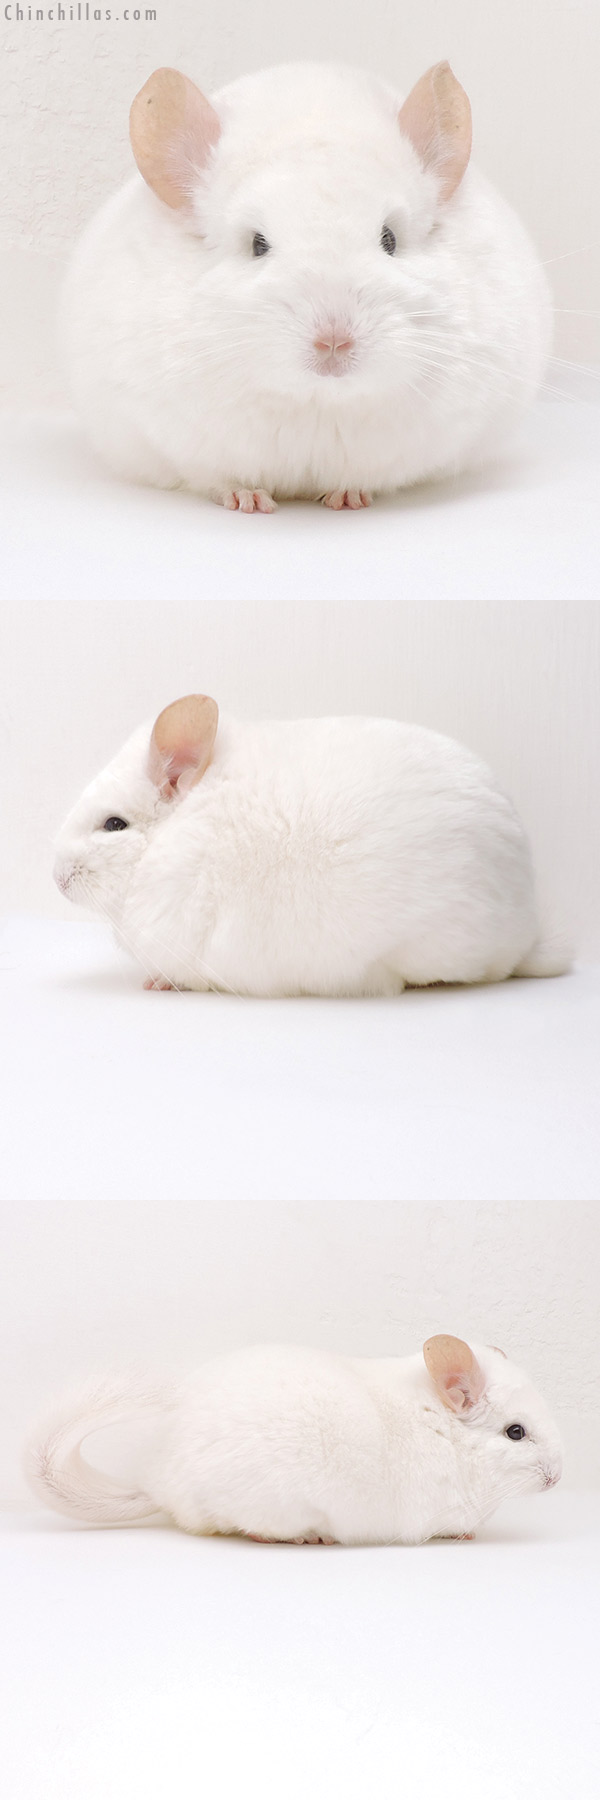 Chinchilla or related item offered for sale or export on Chinchillas.com - 18135 Large Blocky Premium Production Quality Pink White Female Chinchilla